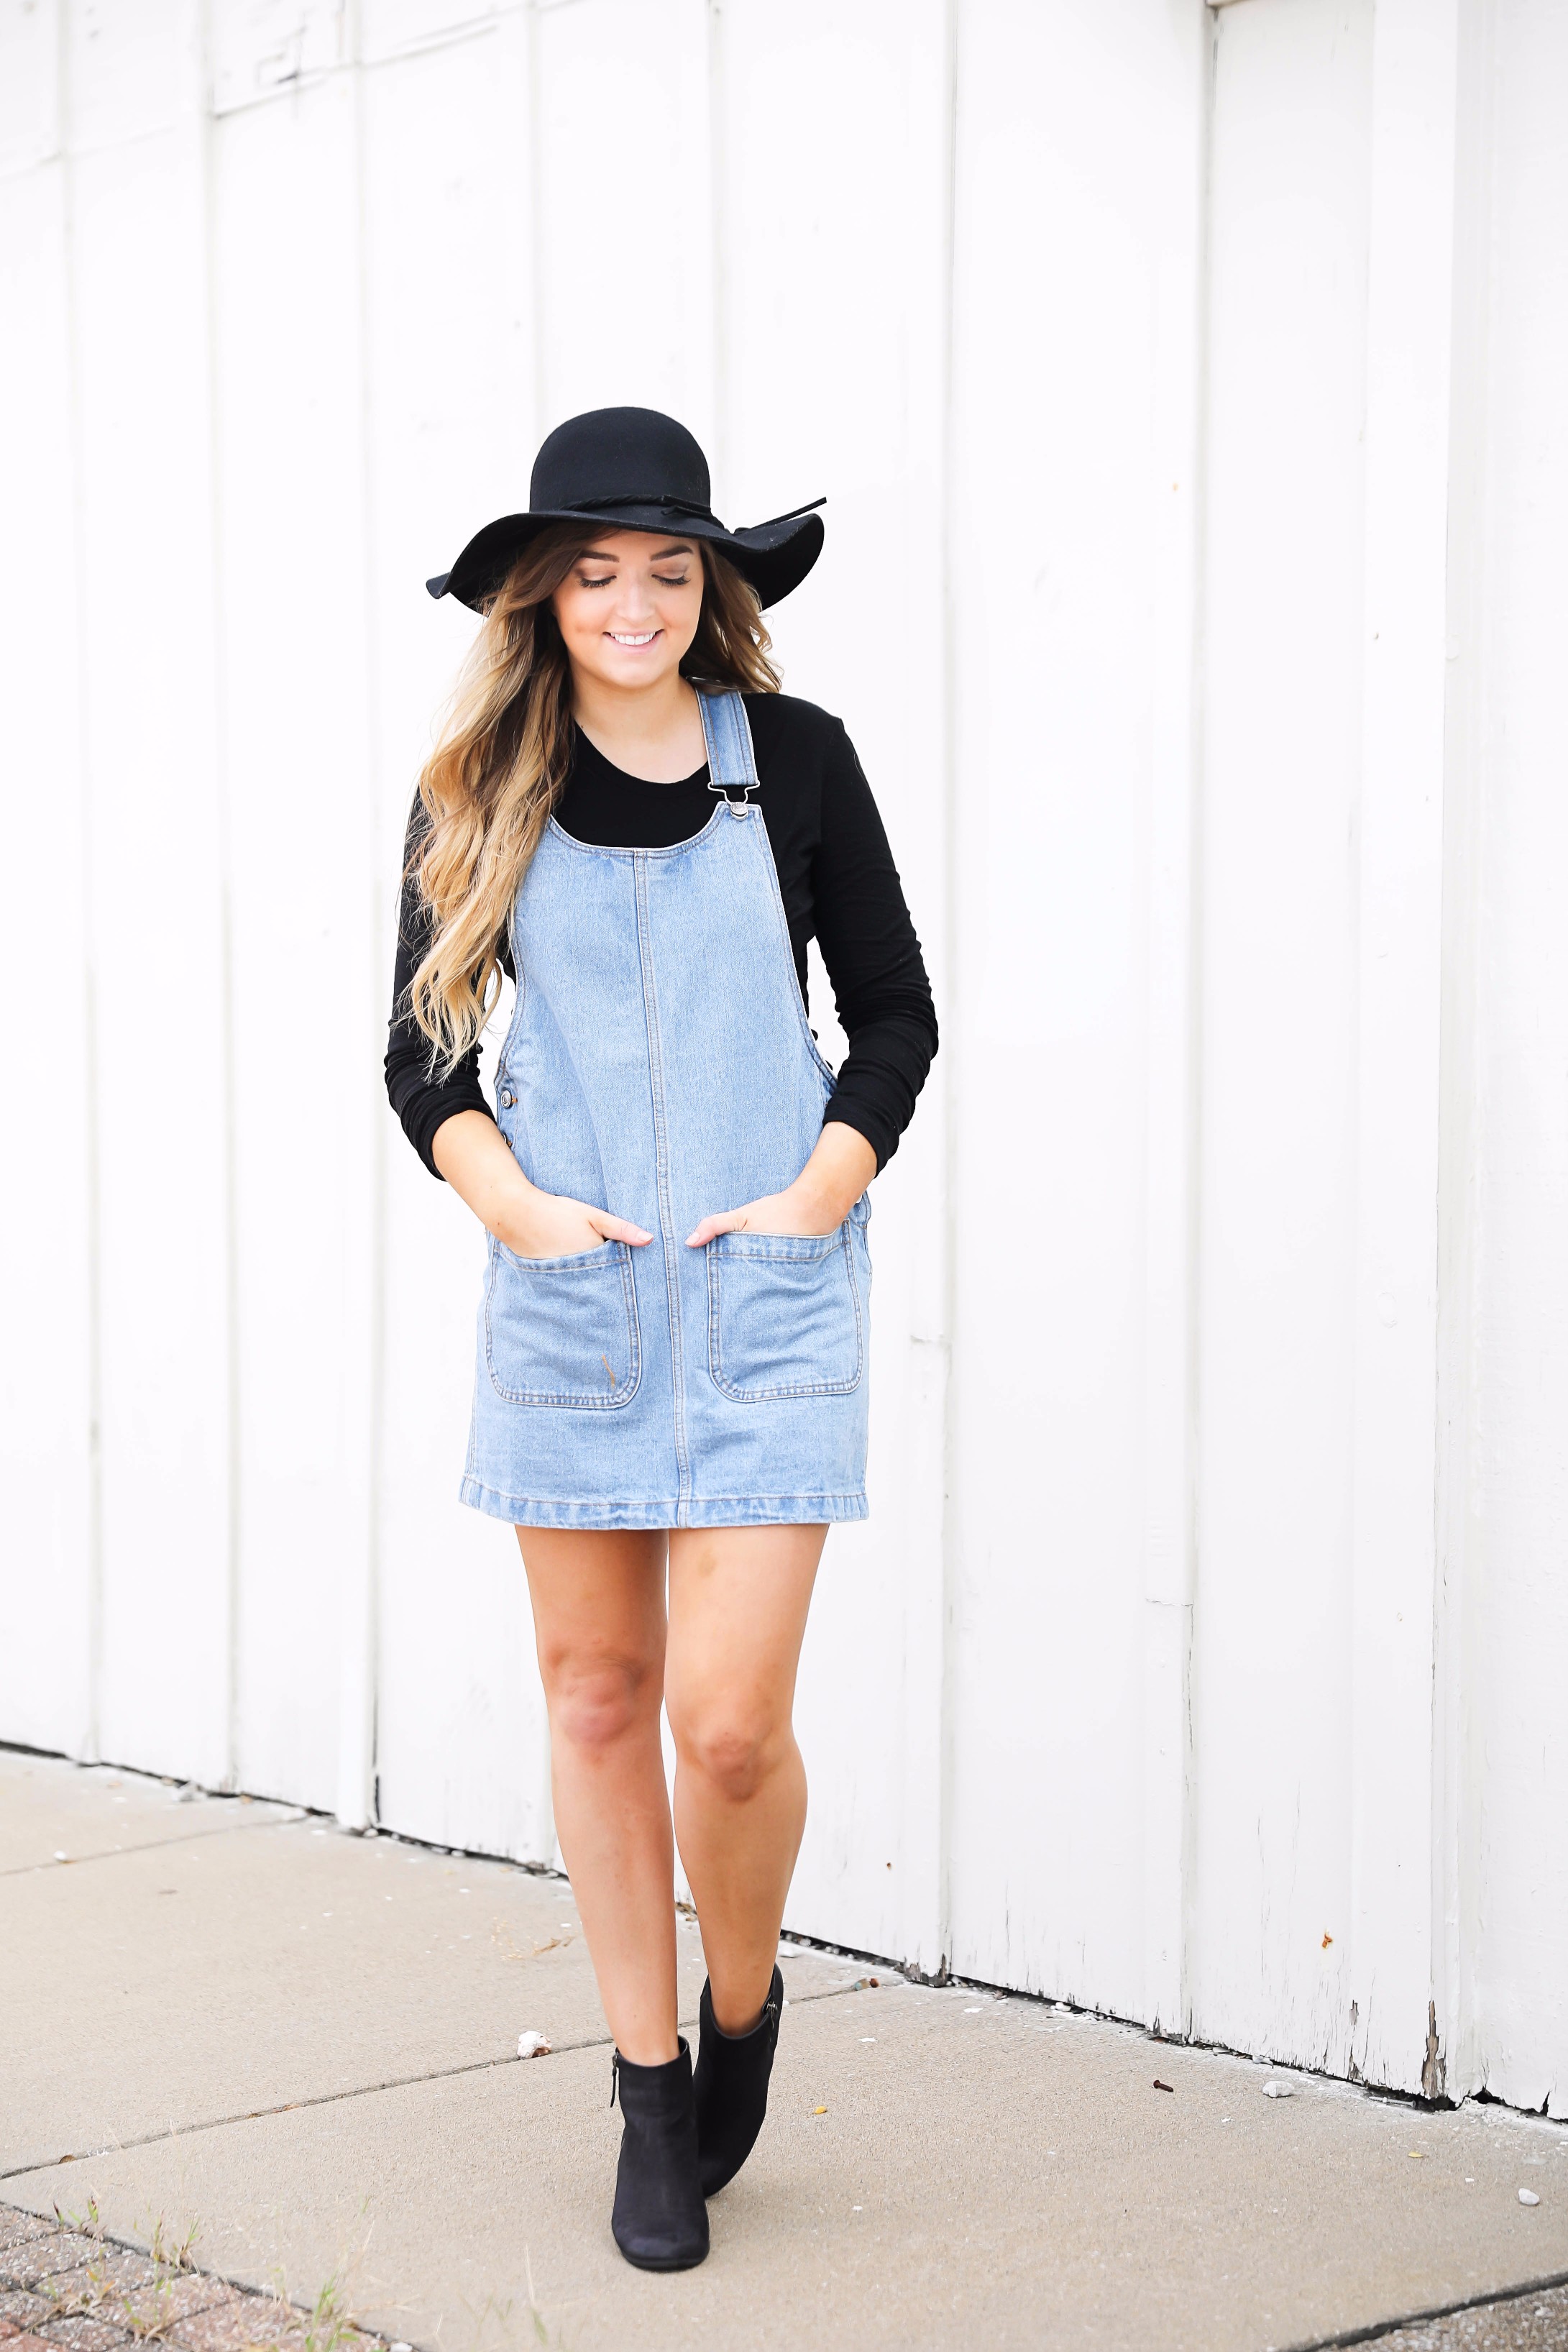 Fall outfit idea! Overall dress and black floppy hat and black booties! I love this look! Find the details on fashion blog daily dose of charm by lauren lindmark